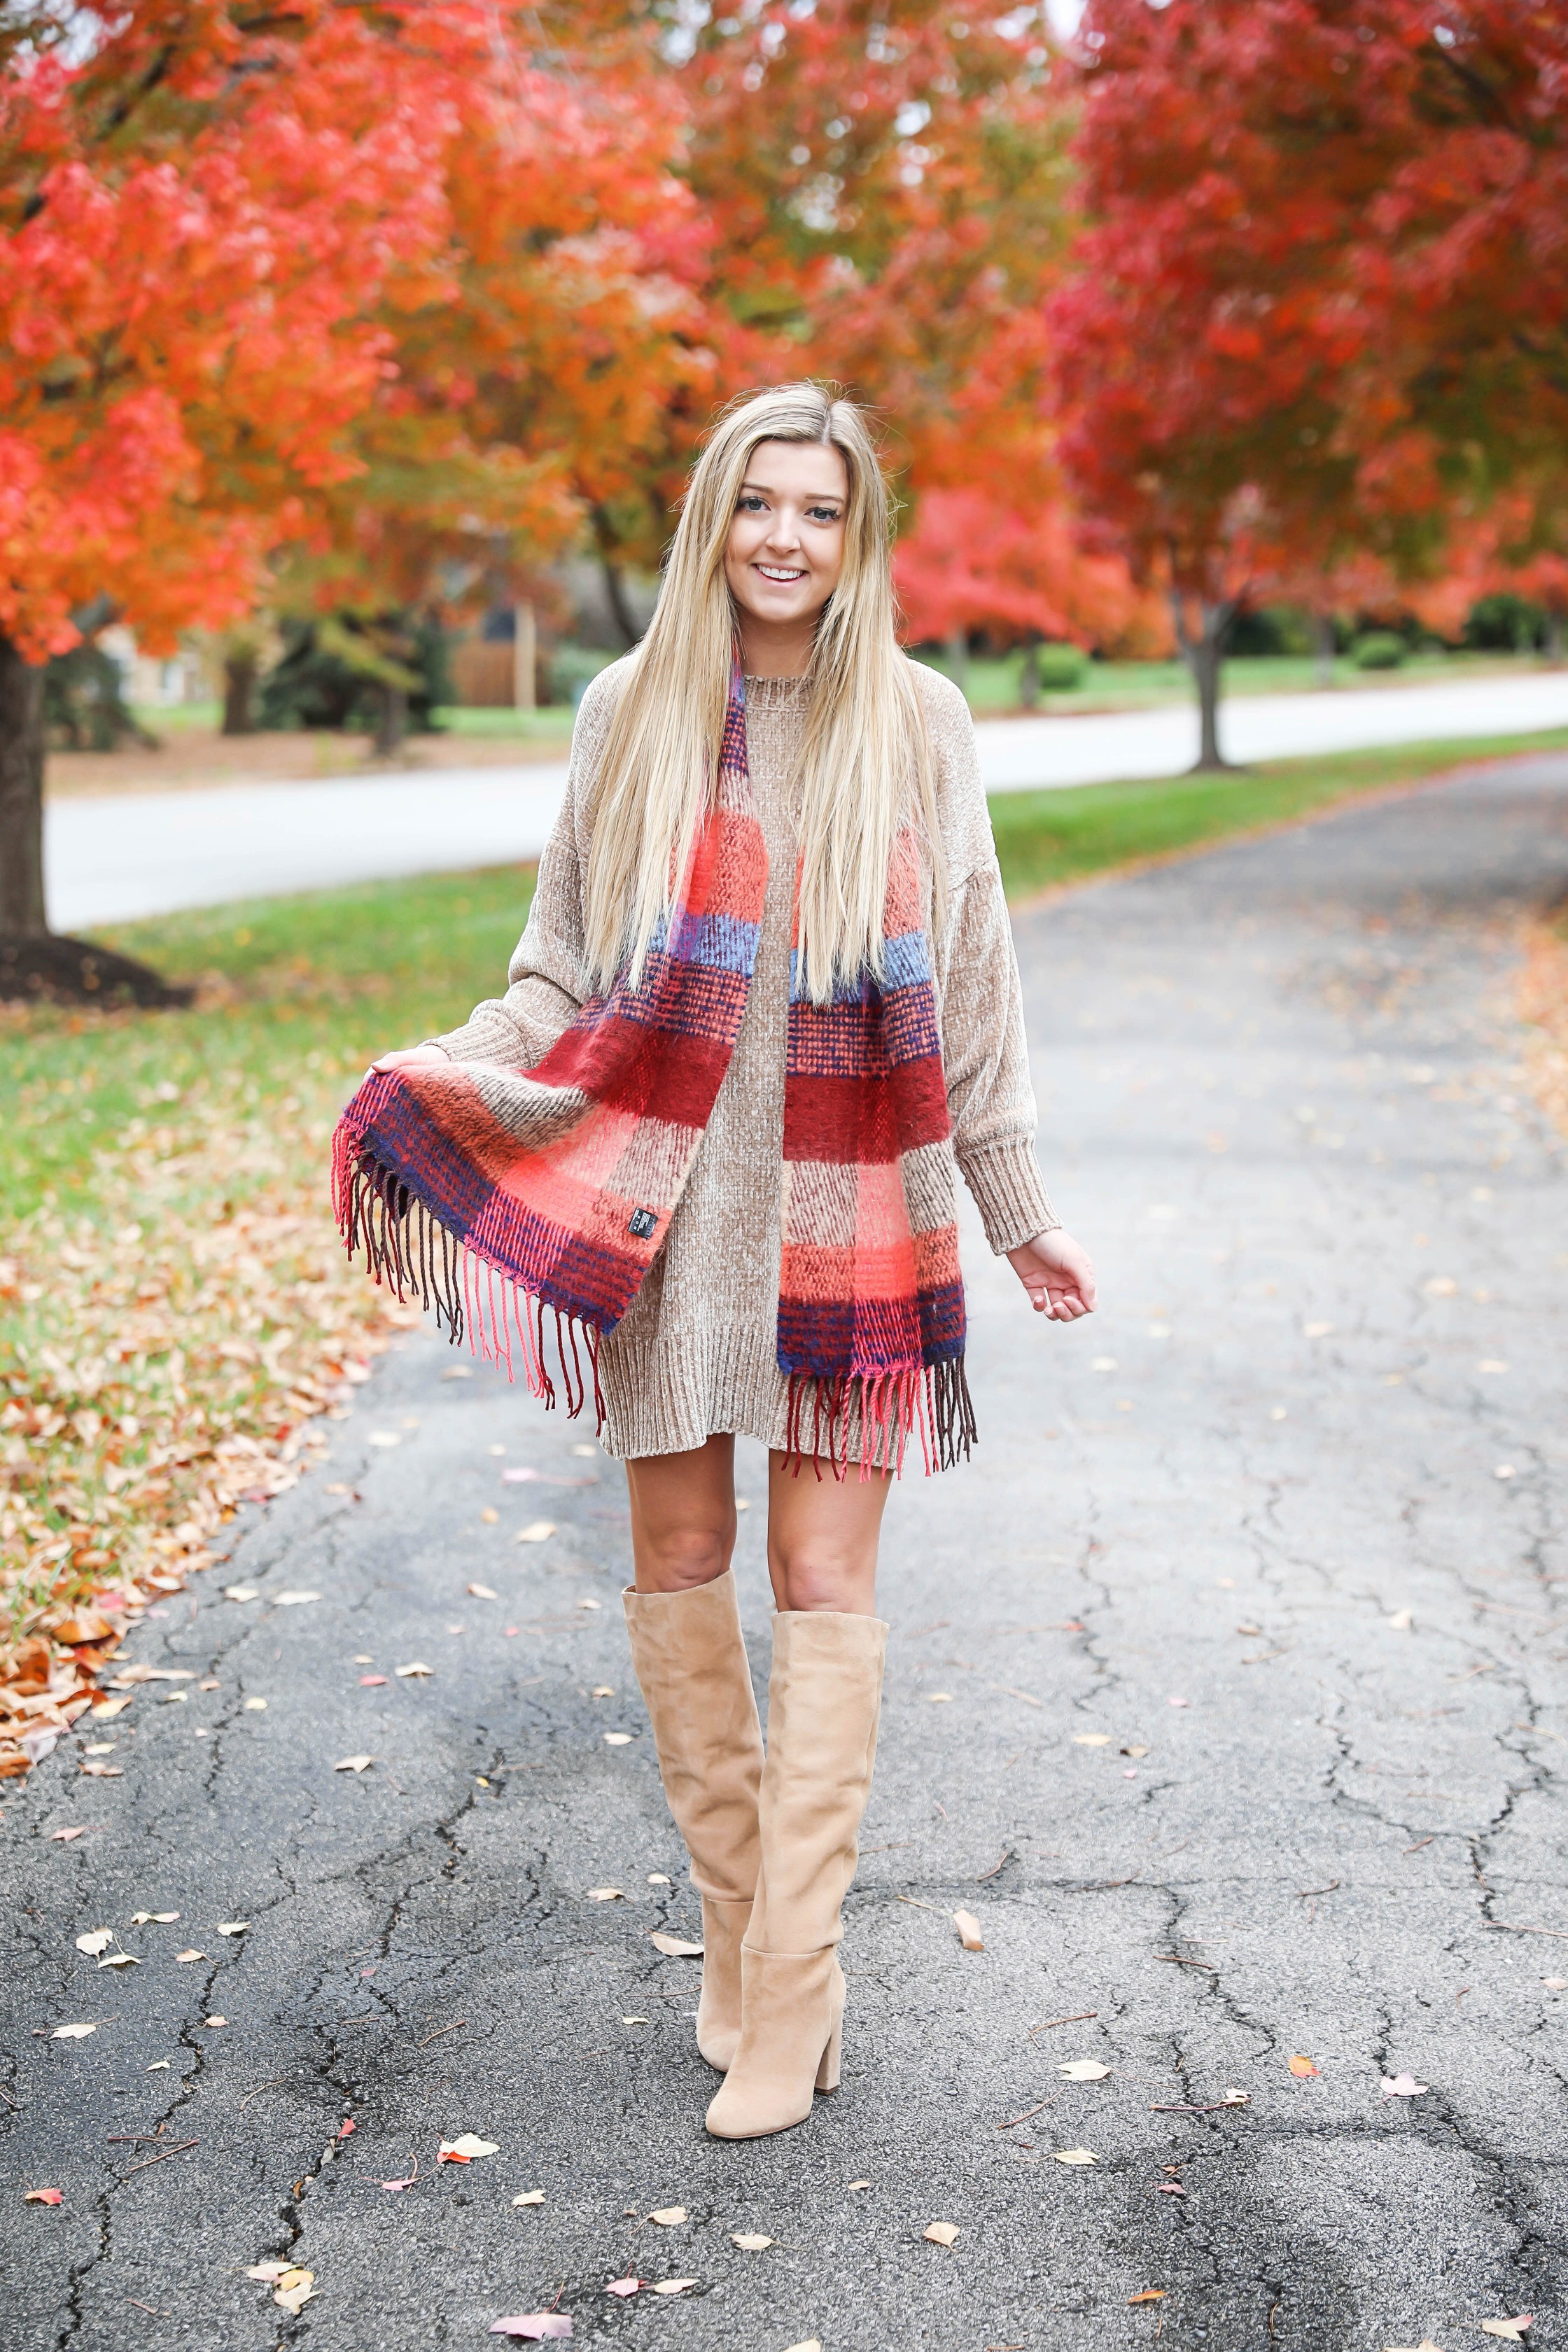 Chenille sweater dress form Red Dress Boutique! I love sweater dresses and chenille is my favorite trend for fall 2018! I paired it with this cute plaid scarf and my favorite tan boots! Nothing like a cute fall outfit in front of beautiful red autumn leaves on the trees! Details on fashion blog daily dose of charm by lauren lindmark